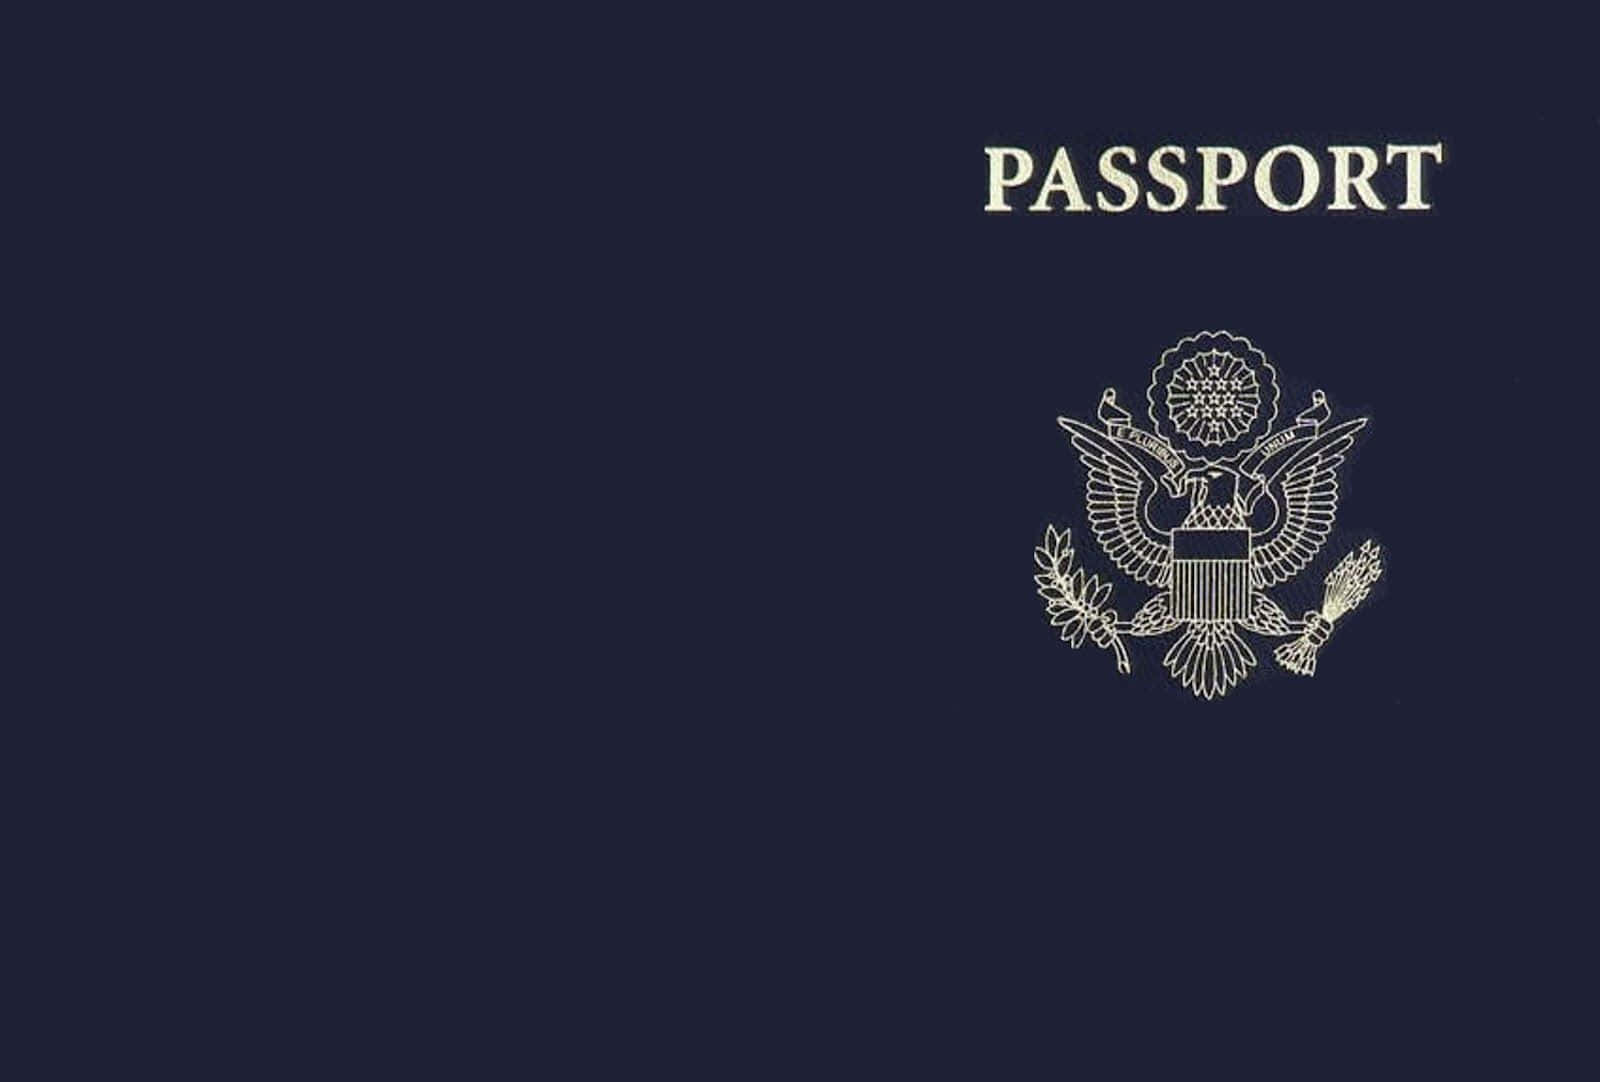 A Passport With The Us Eagle On It